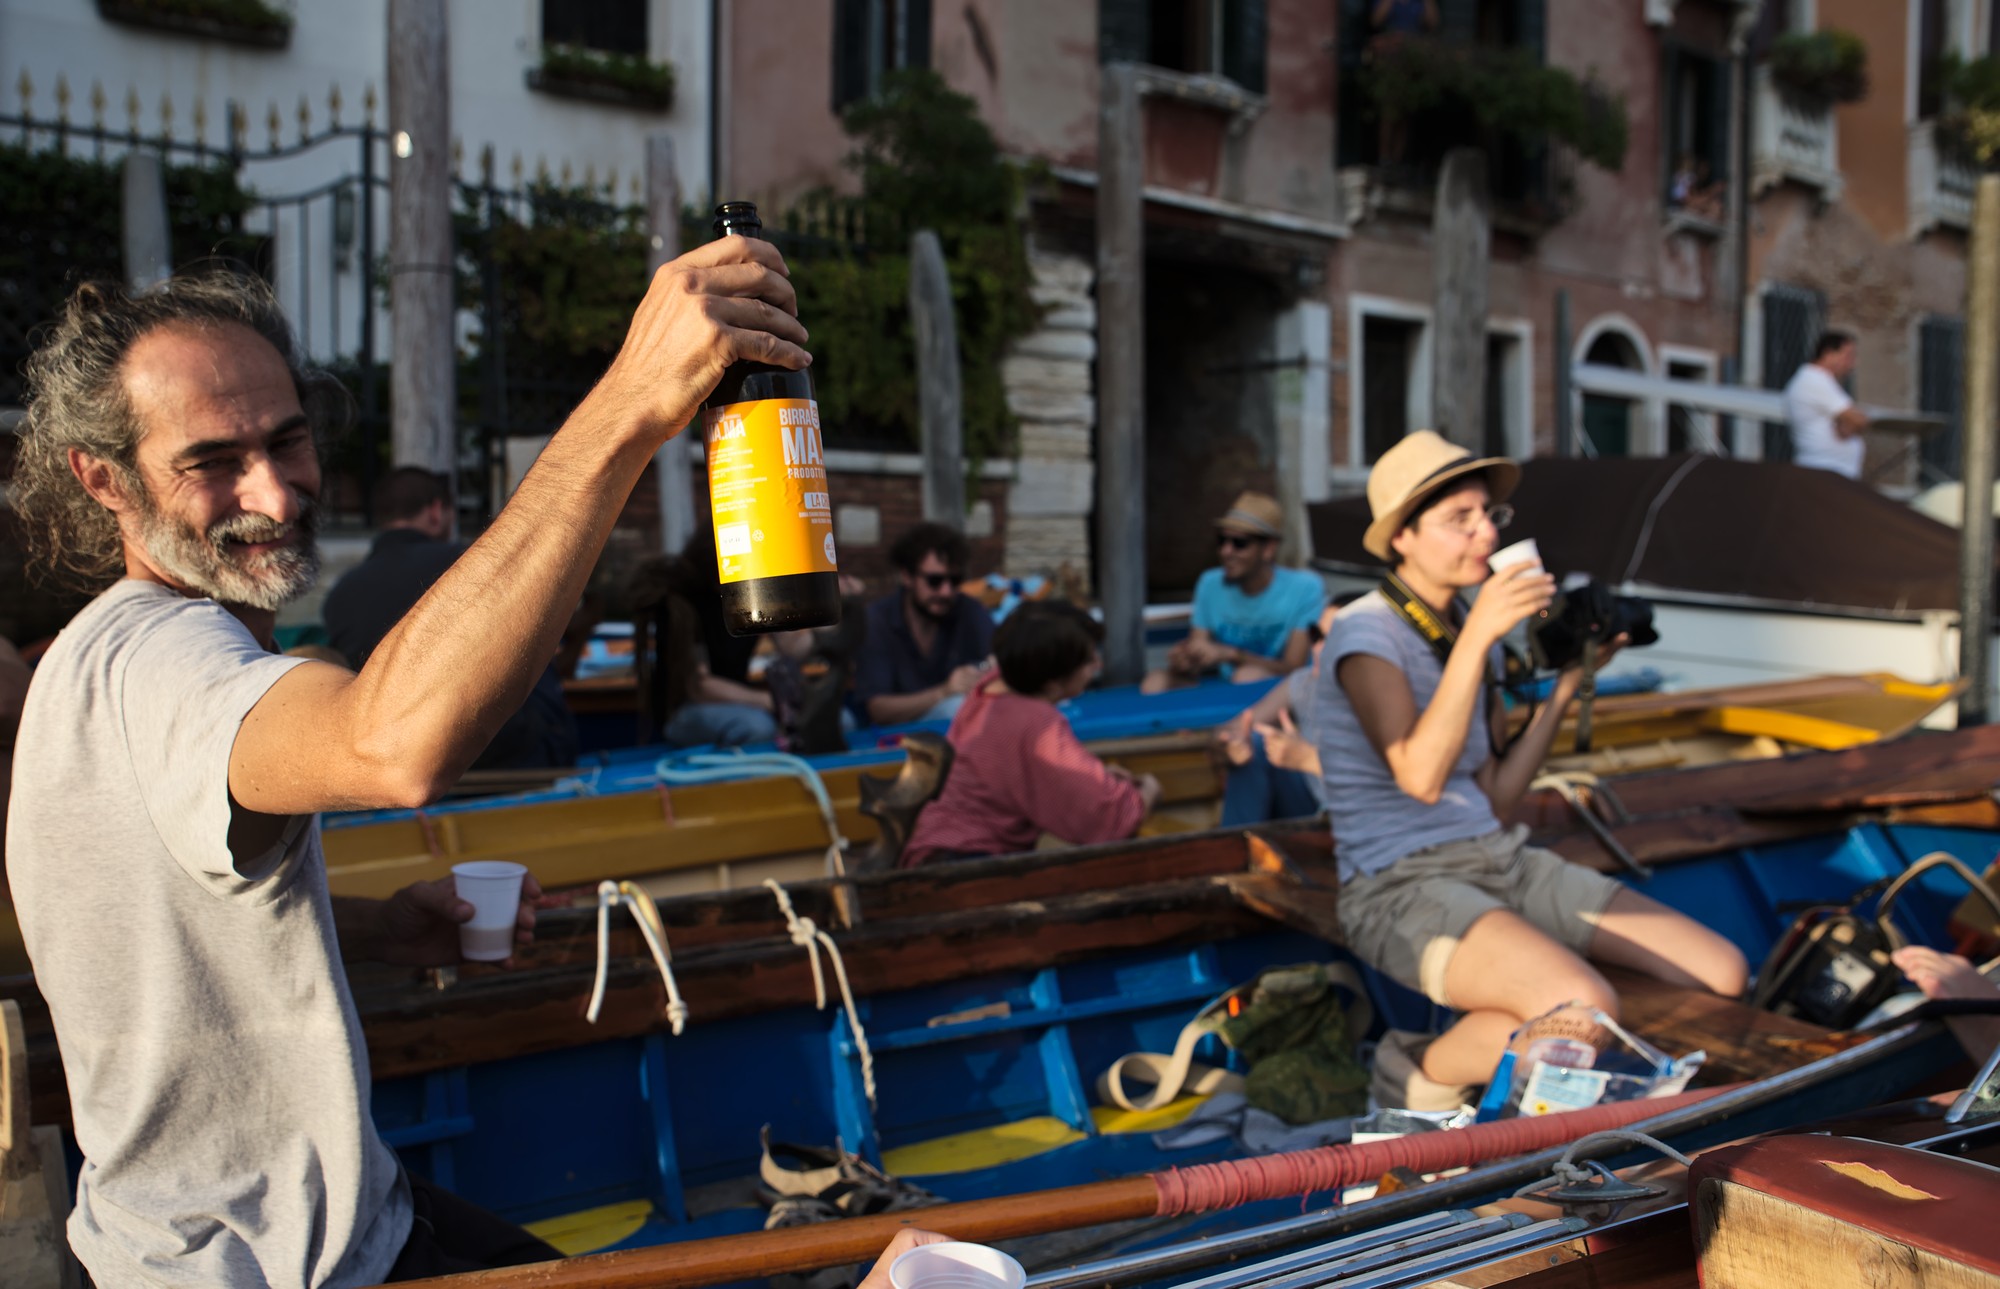 Cheers! while waiting for the last race of the Regata Storica 2018 on the Grand Canal.